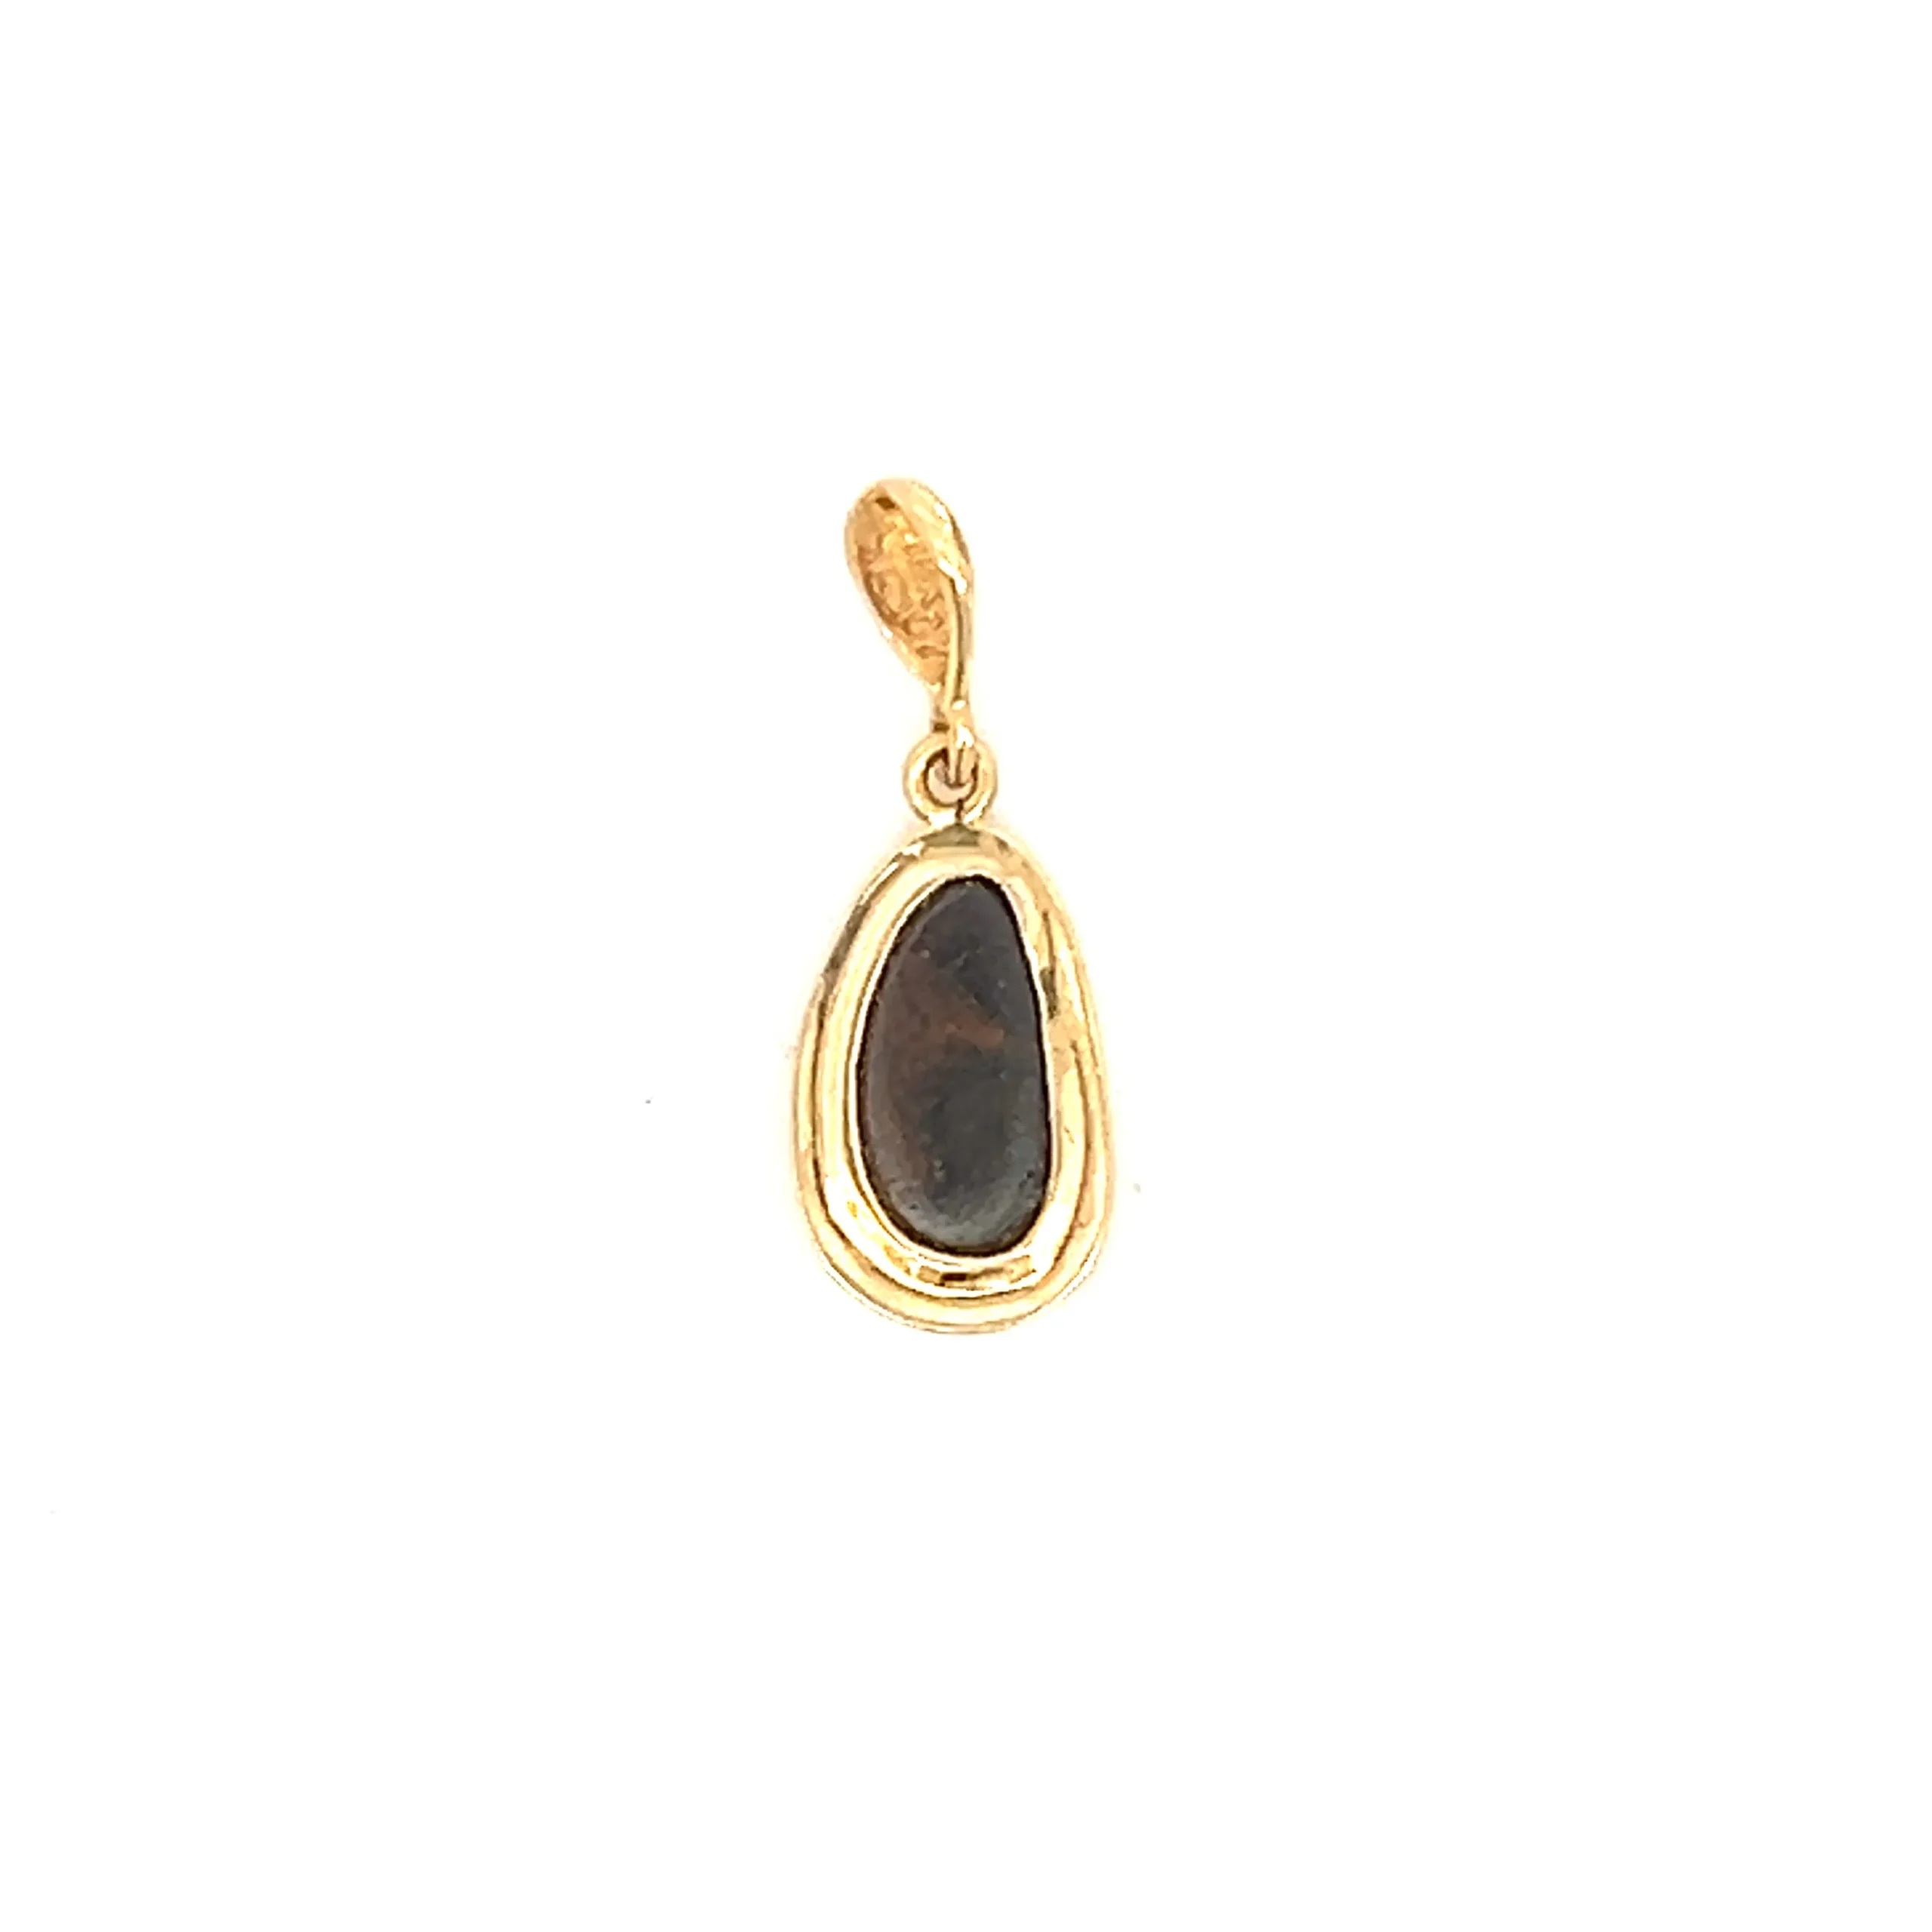 One estate 18 karat yellow gold pendant with an asymmetrical oval cabochon opal with a blue and green color measuring 10.5x6.8mm in a bezel setting. the entire pendant measures 23x8.5mm.